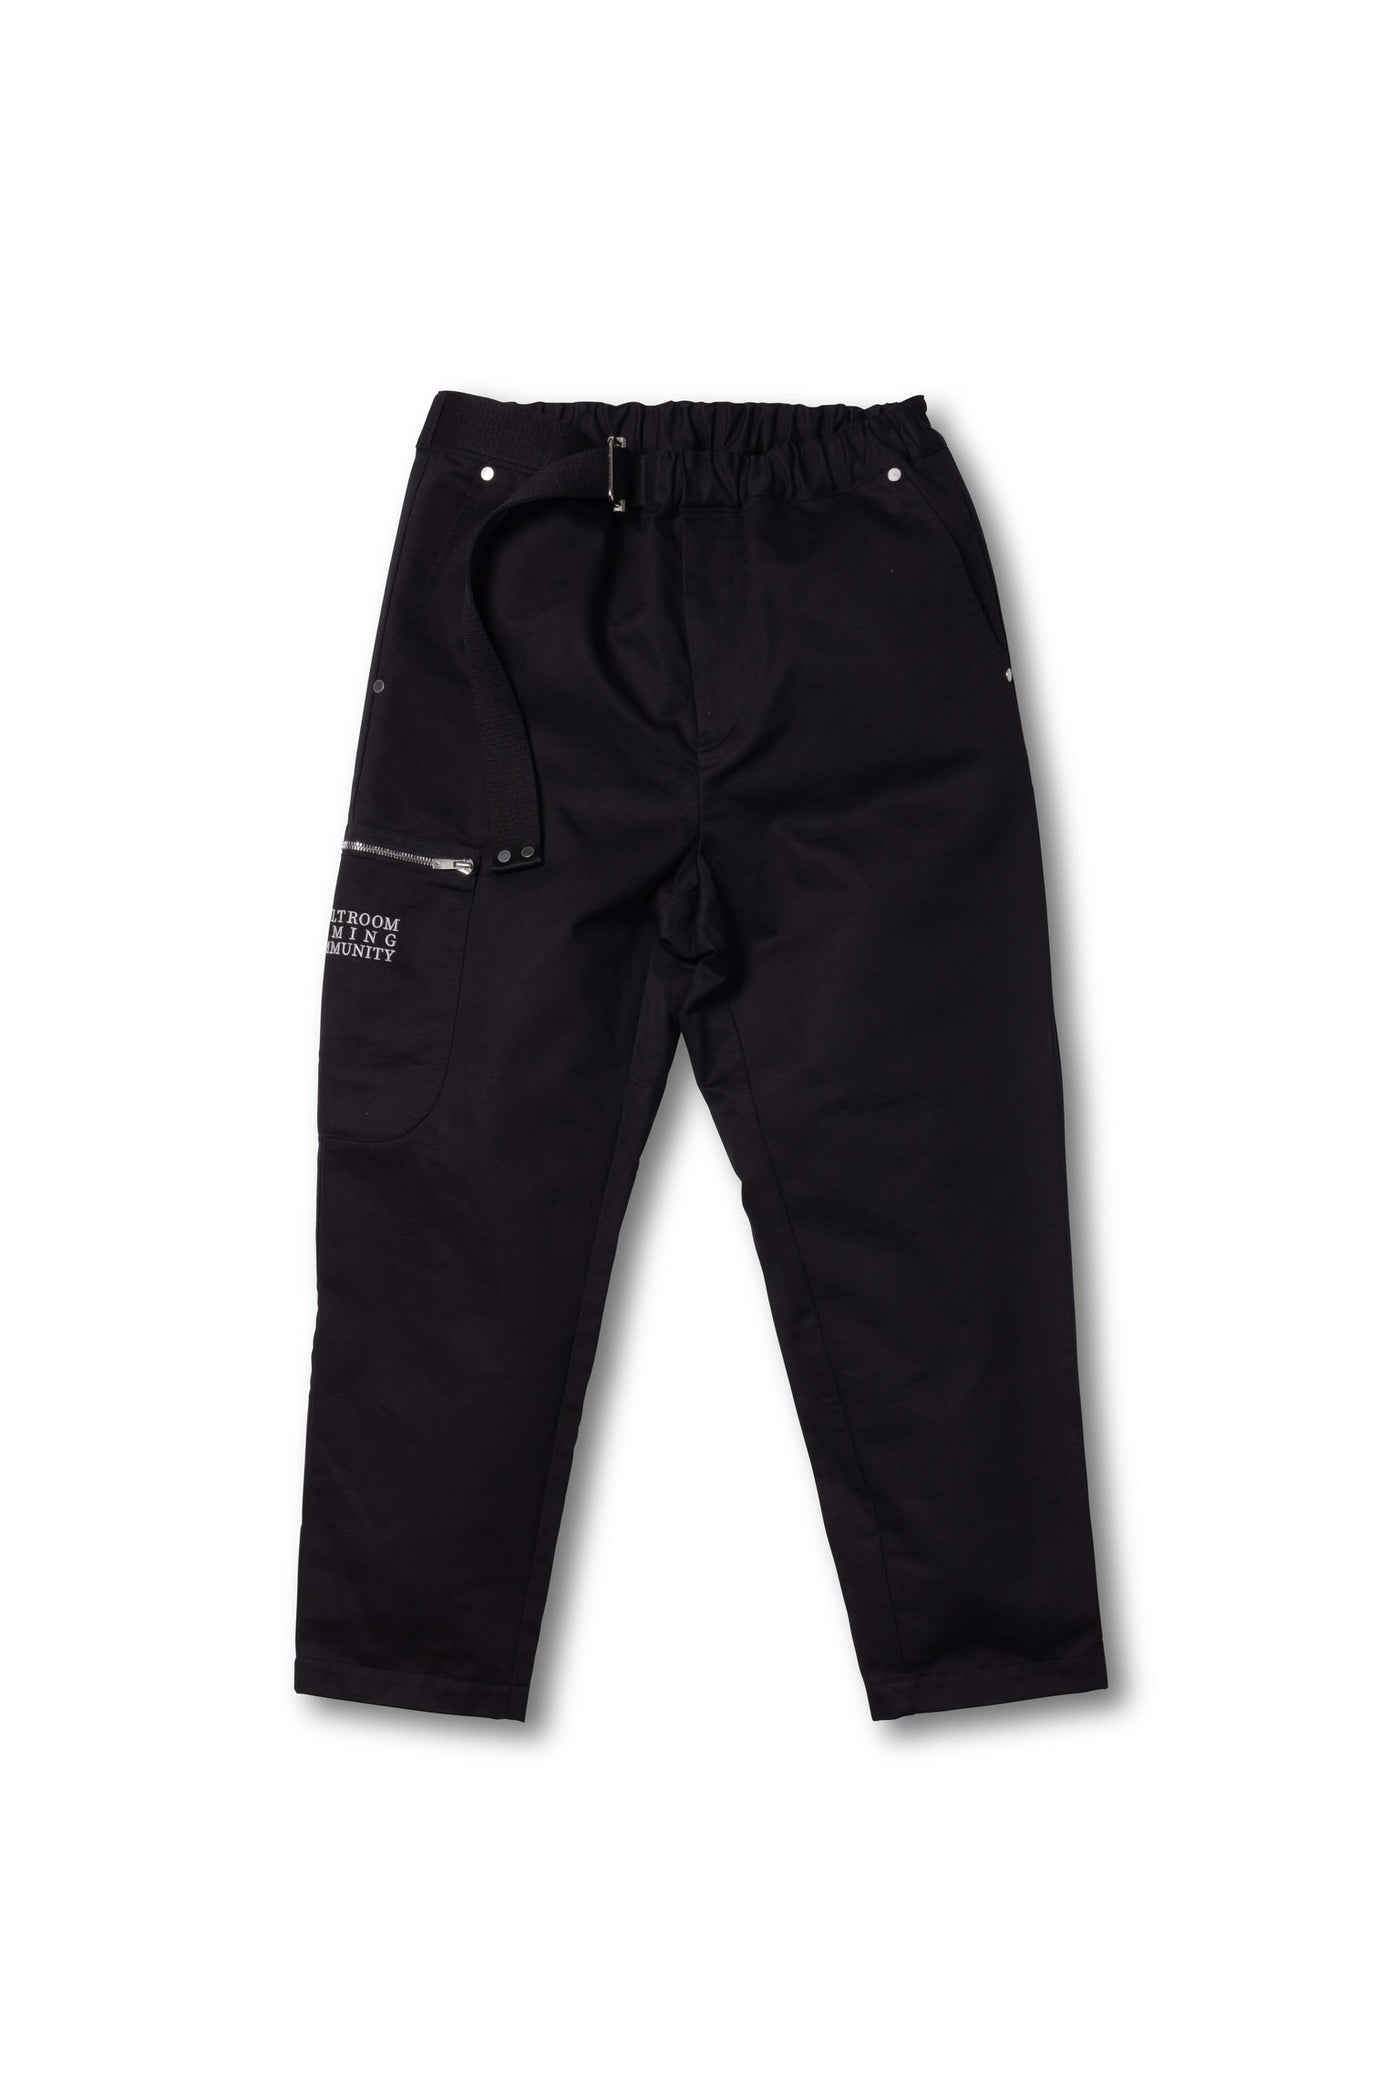 vaultroom VGC CROPPED TROUSERS-